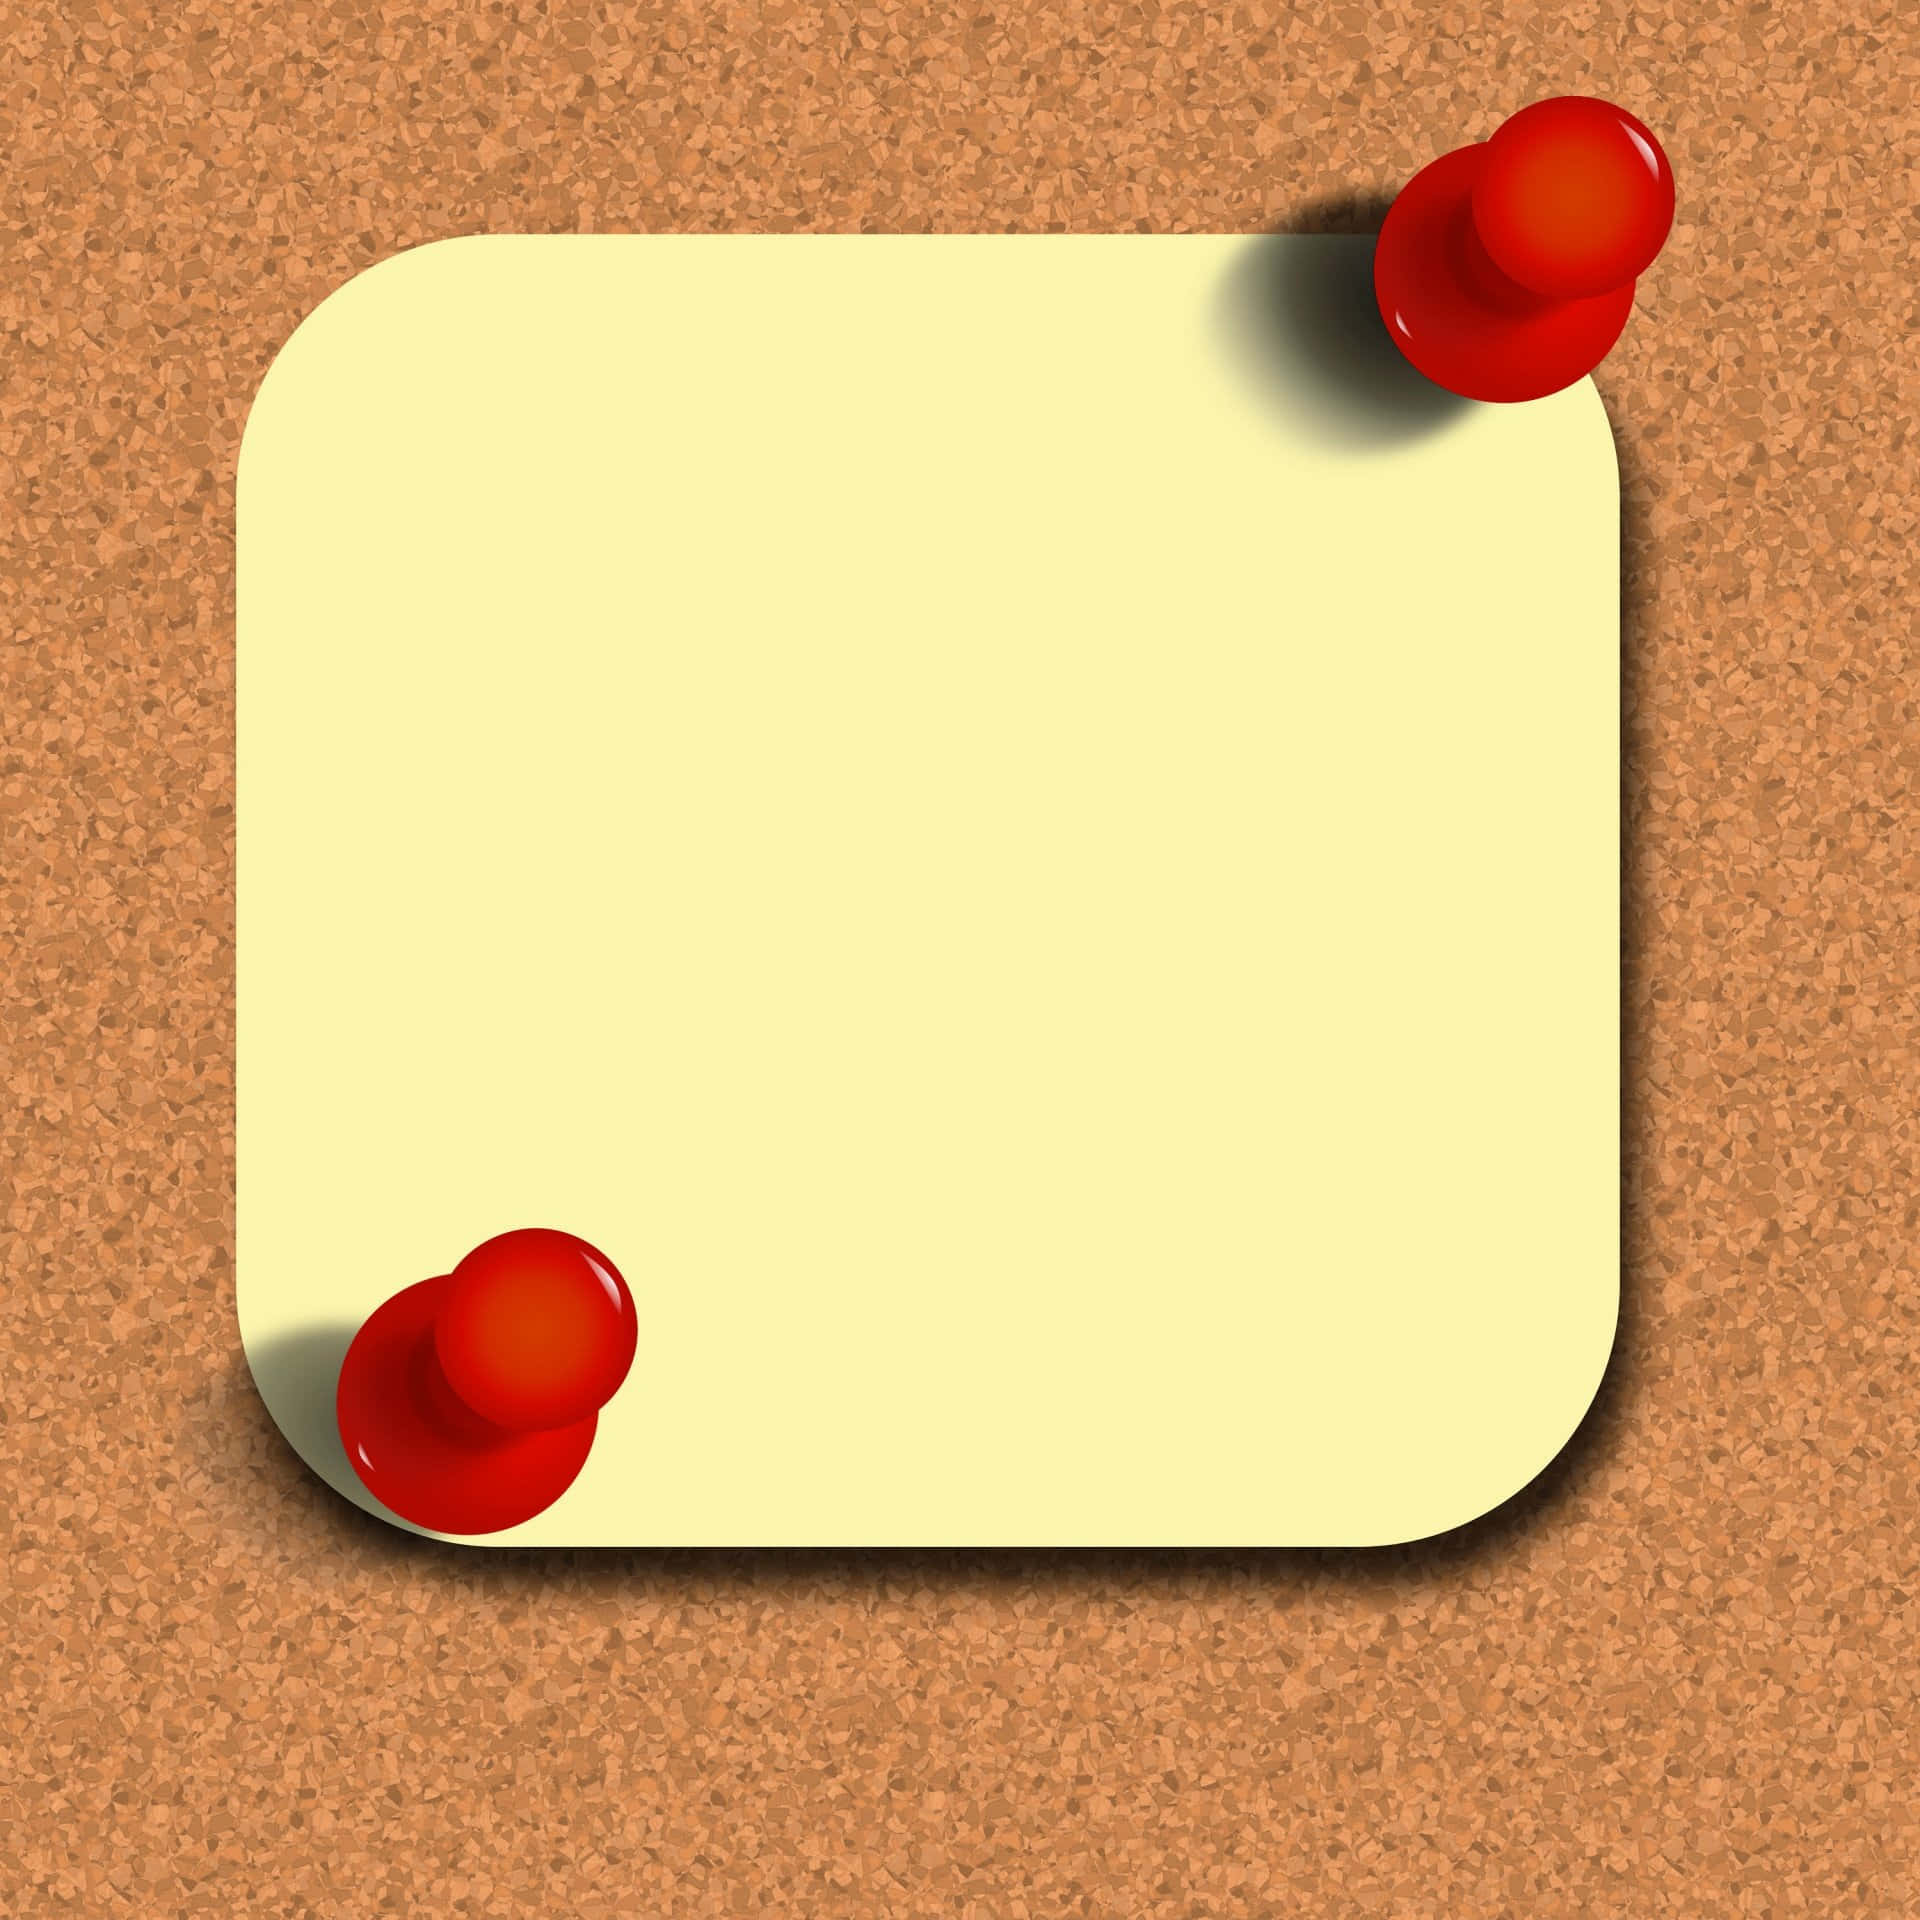 A Notepad With Red Pins On It